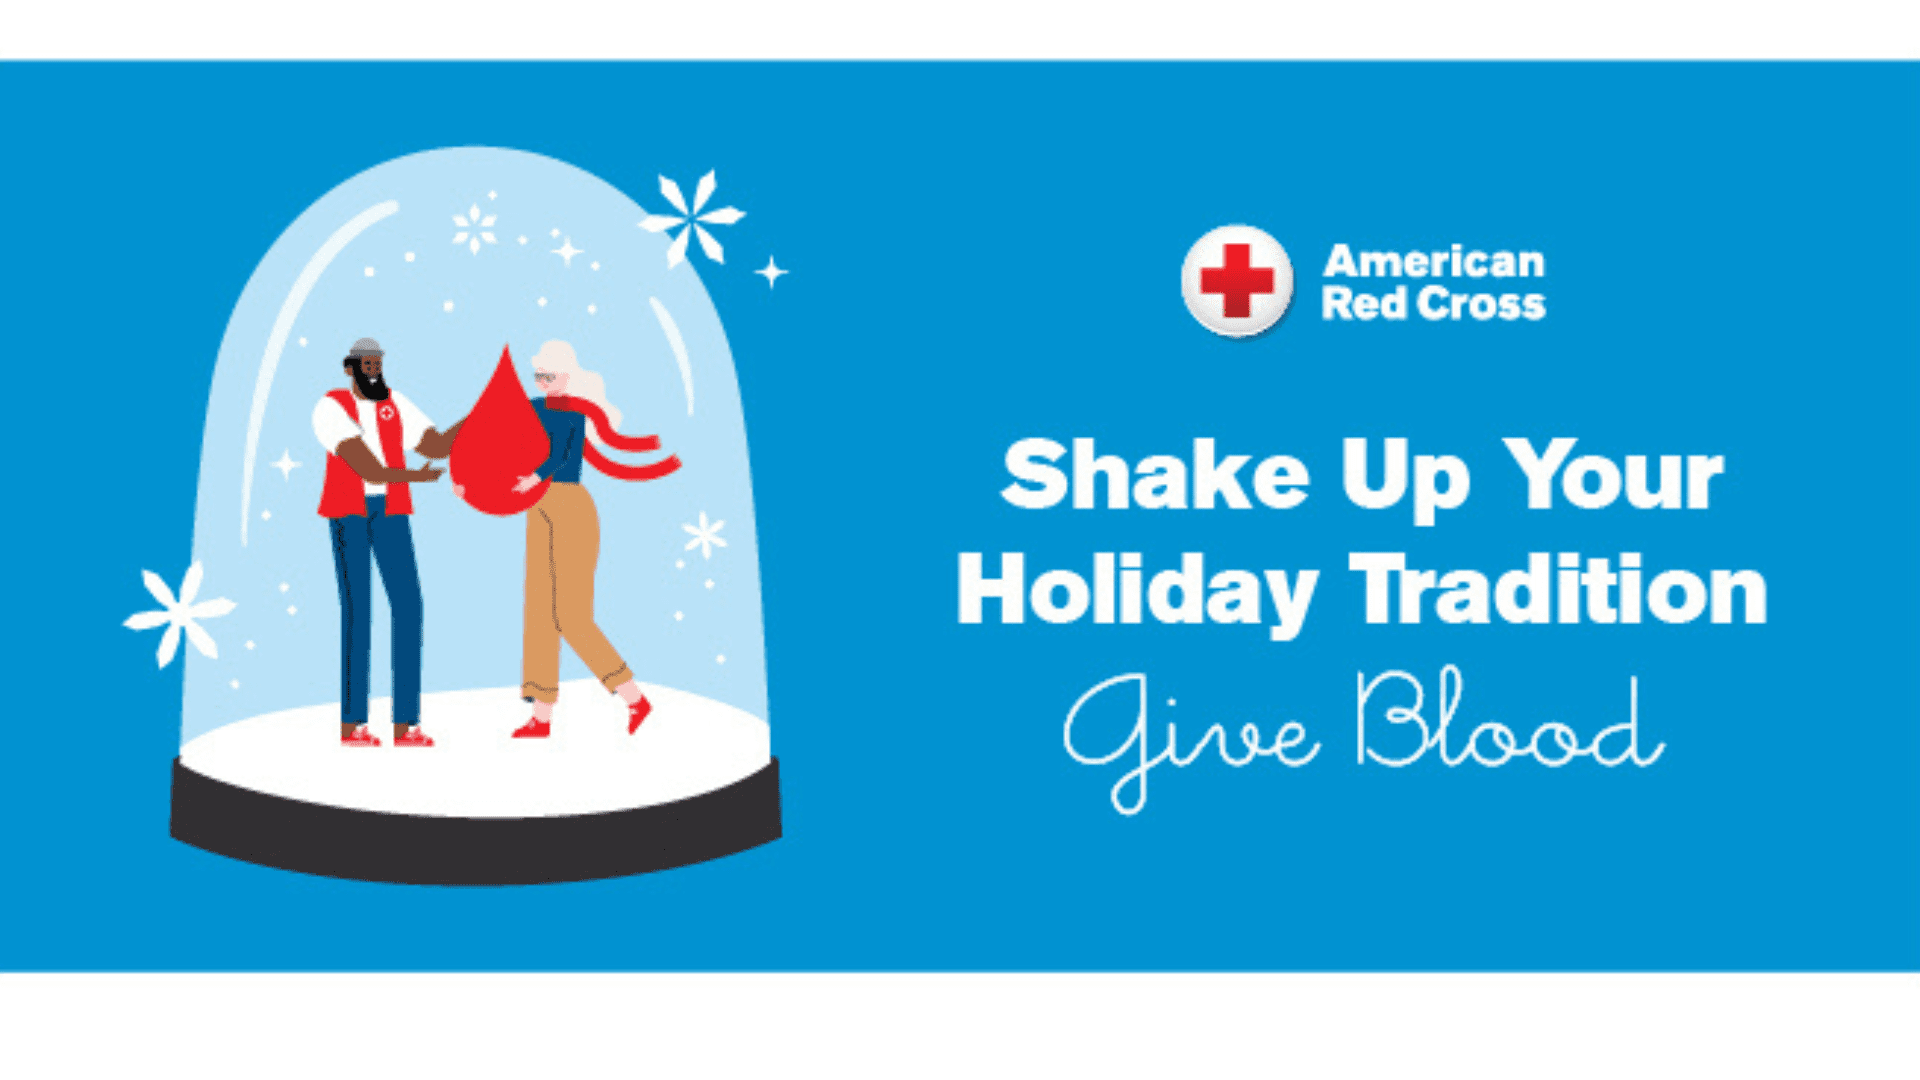 A flyer about the holiday tradition of donating blood